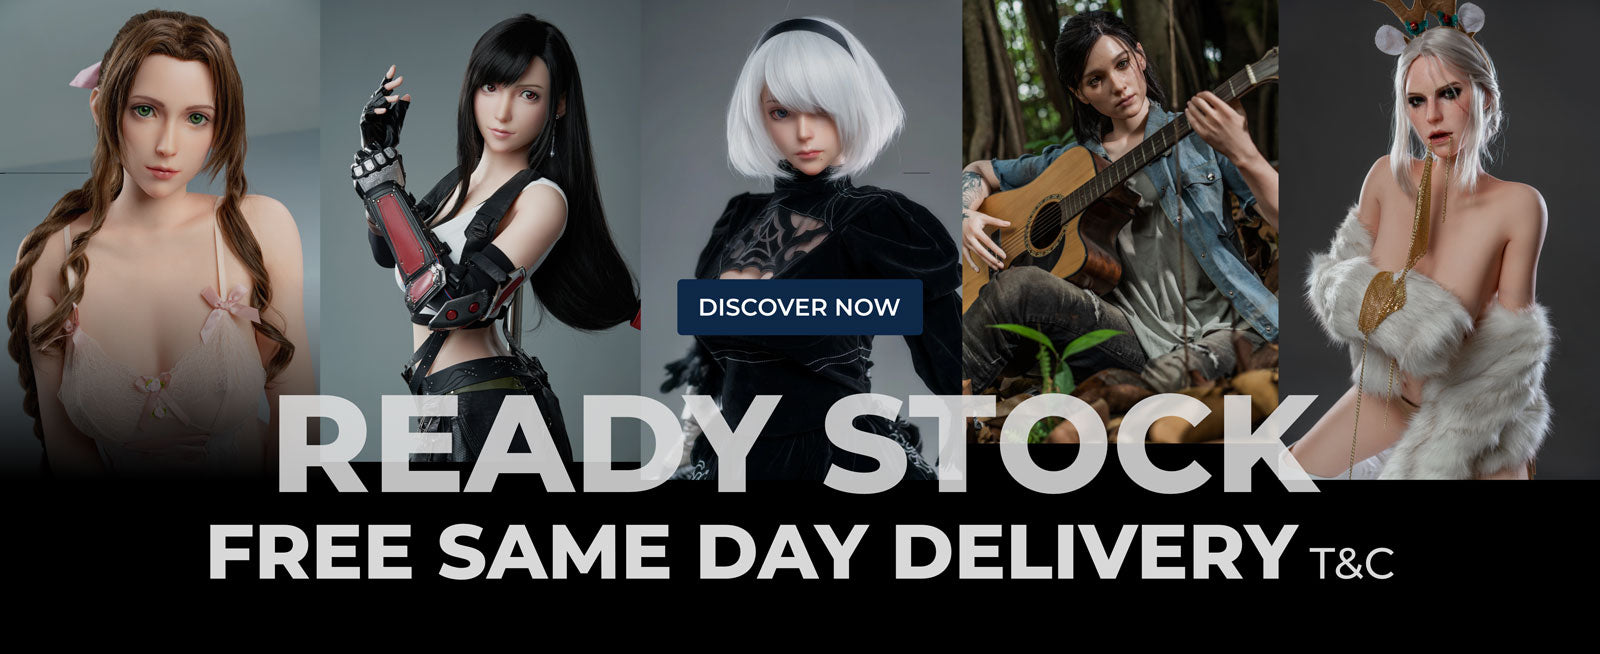 Ready-Stock-Sex-Dolls-Free-Same-Day-Delivery-Desktop-Banner